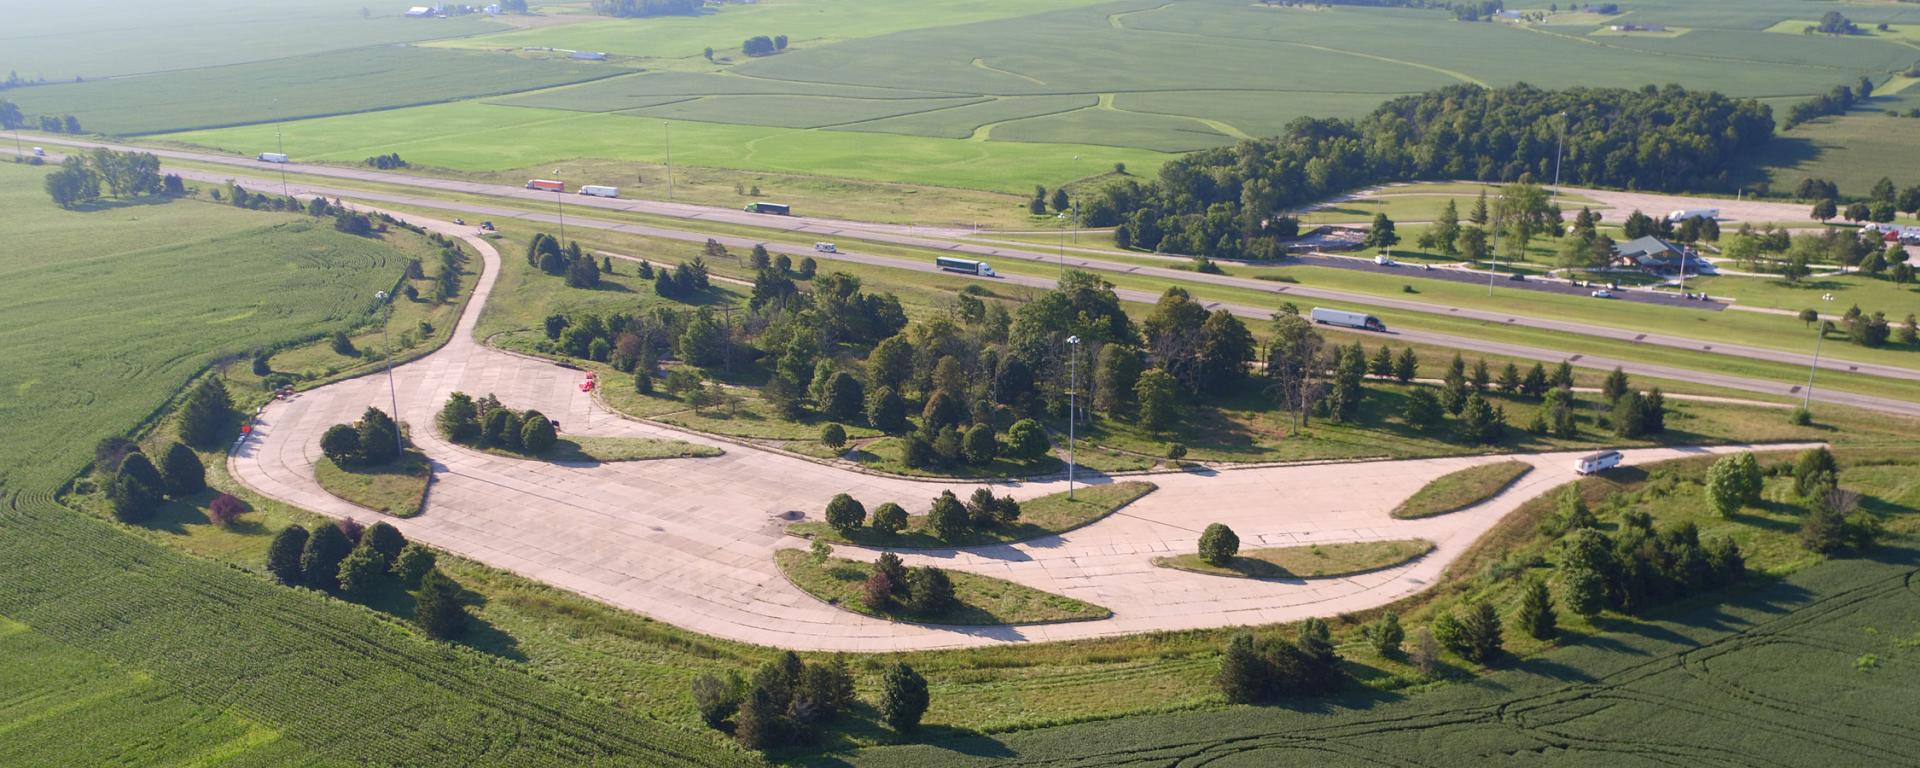 aerial view of an interstate rest area